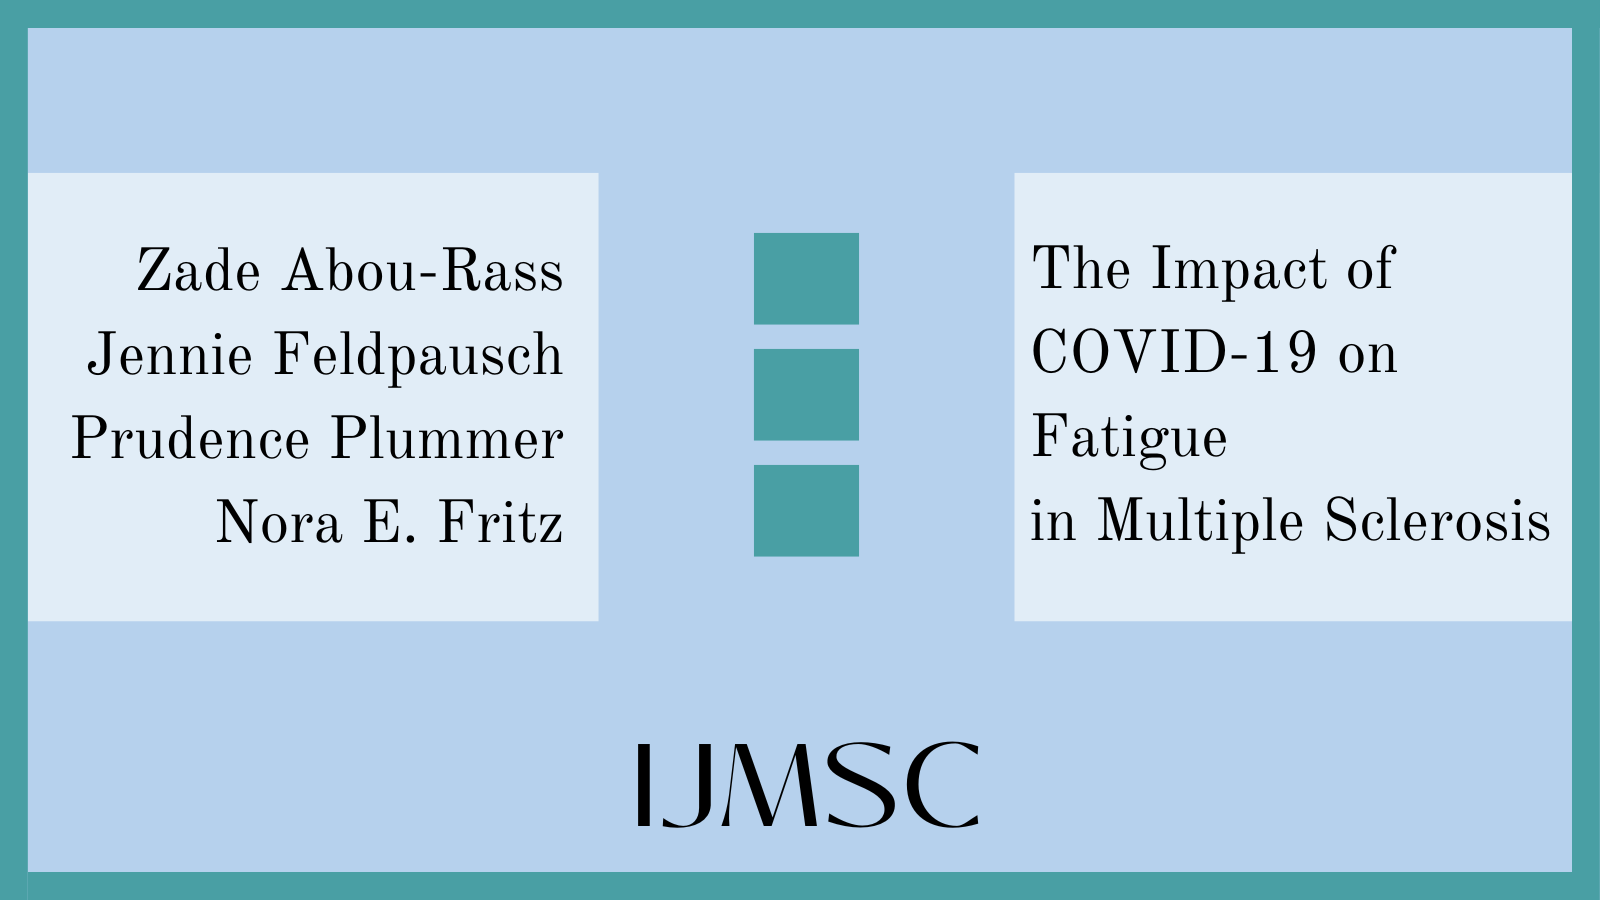 The Impact of COVID-19 on Fatigue in Multiple Sclerosis 